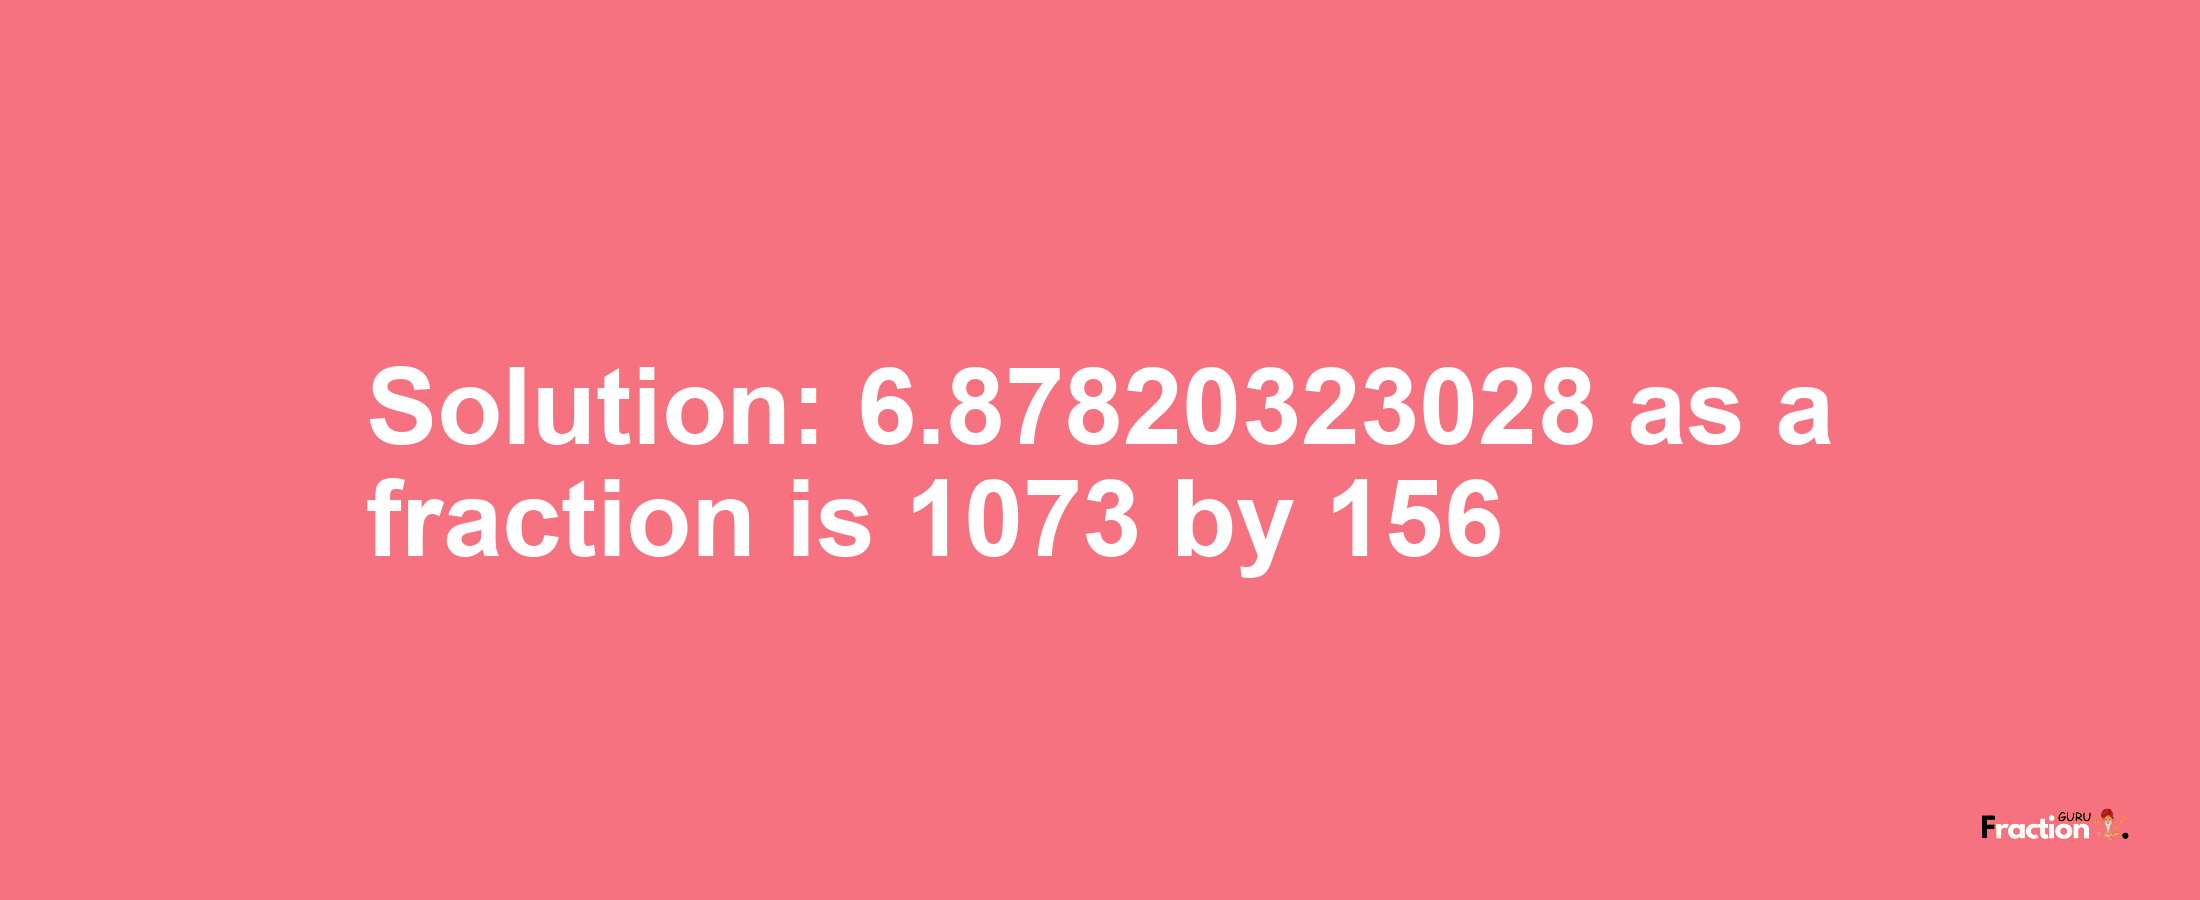 Solution:6.87820323028 as a fraction is 1073/156